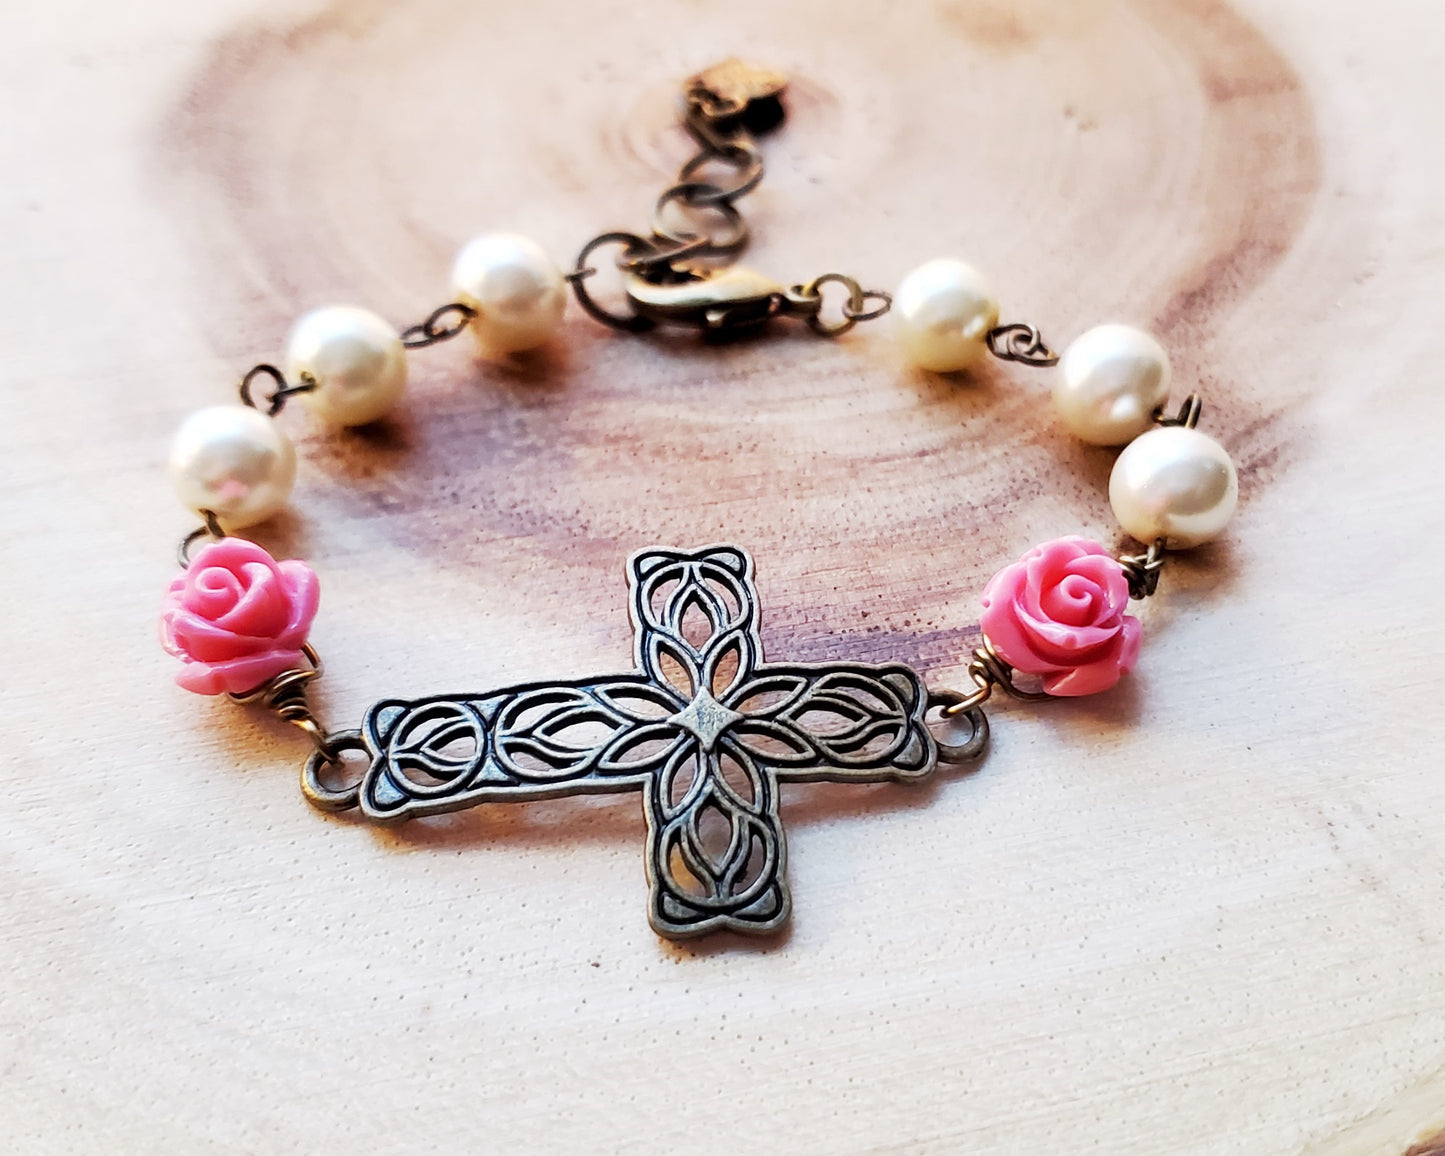 Garden of Faith Pearl Rose Sideways Cross Butterfly Heart Bracelet made with Upcycled Vintage Faux Pearls